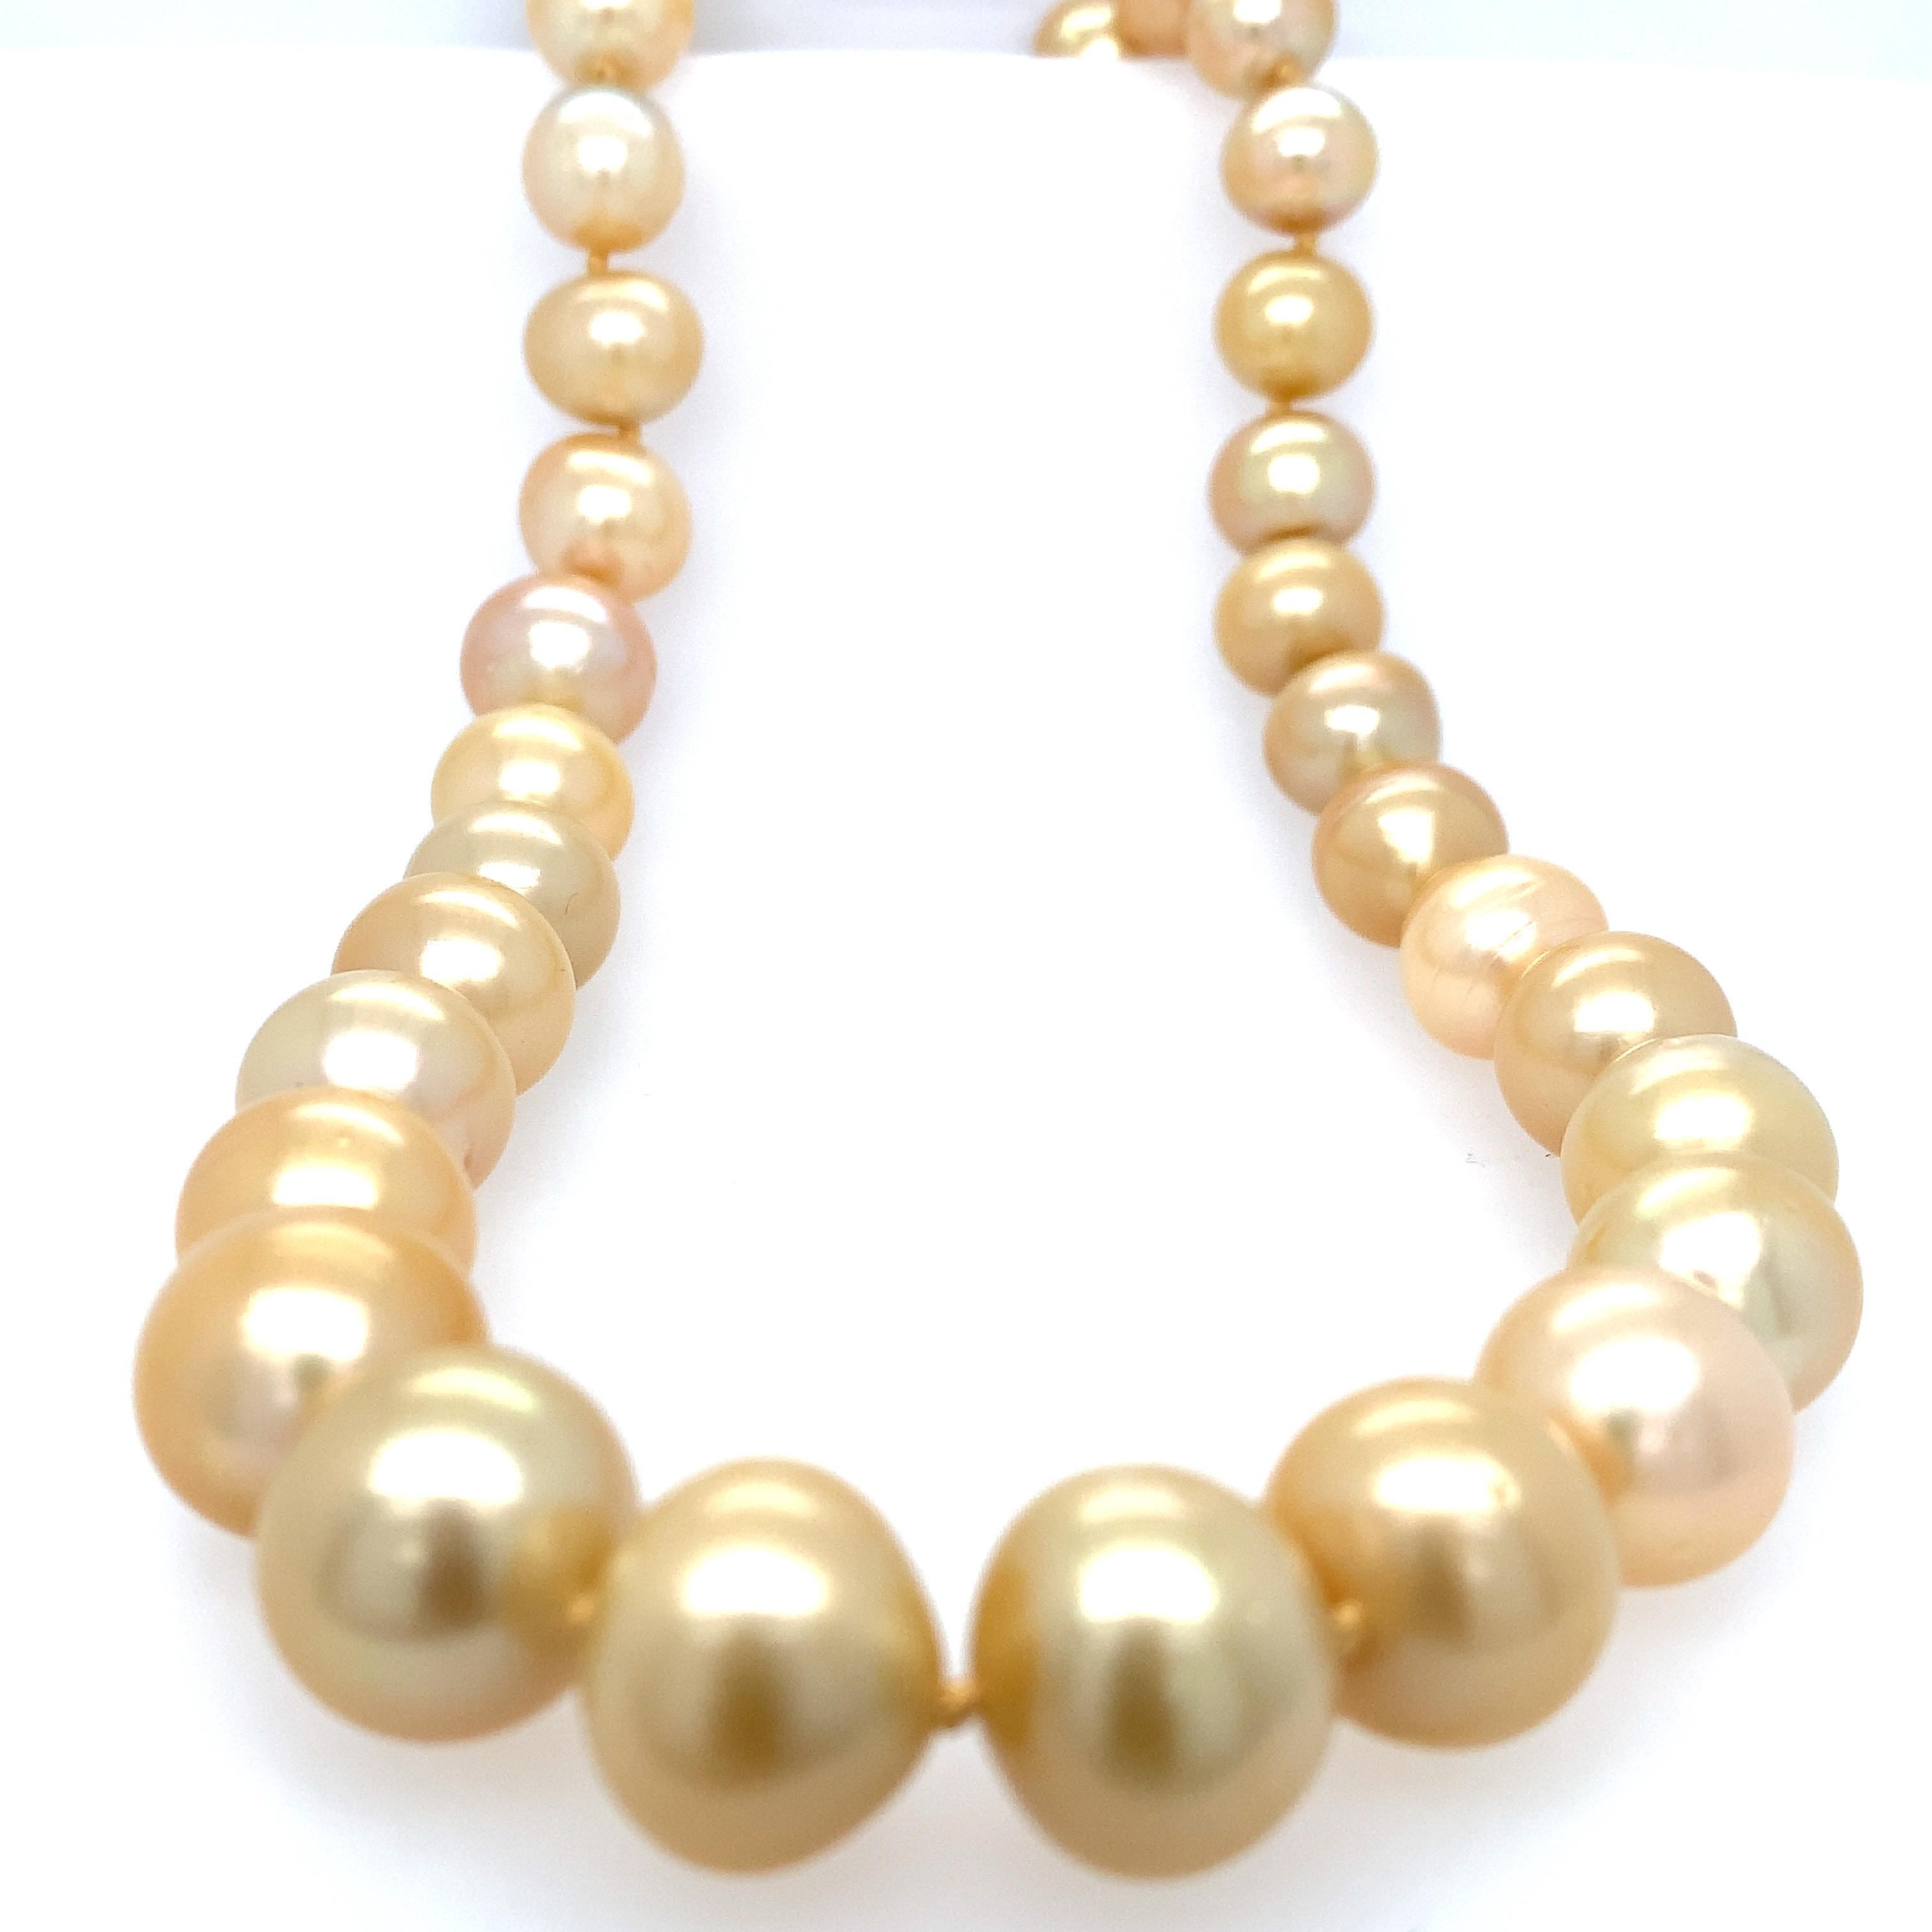 Golden South Sea Pearl Strand Necklace with 14k Yellow Gold Clasp For Sale 3